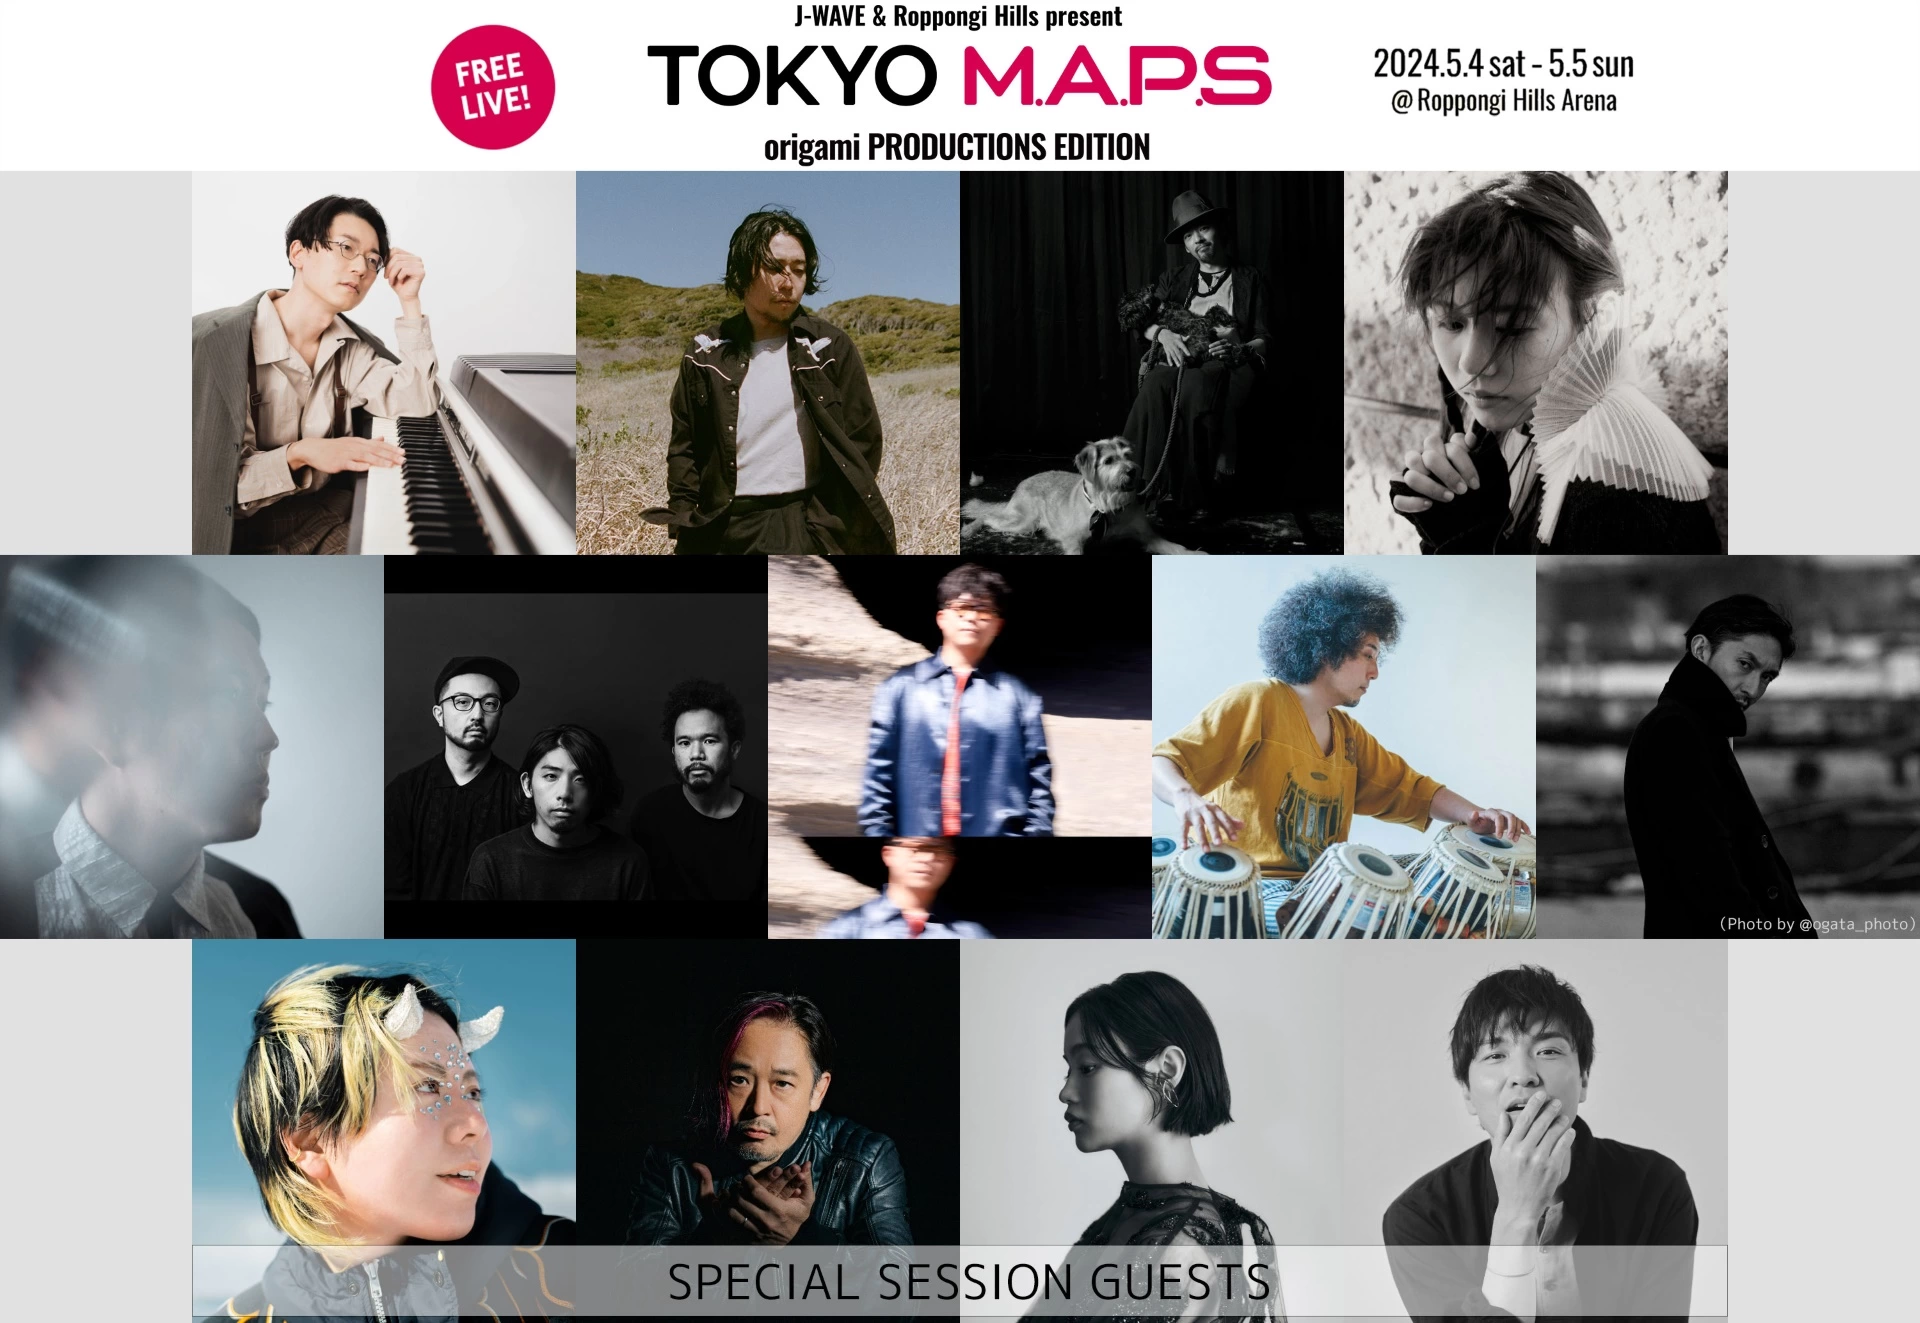 J-WAVE & Roppongi Hills present TOKYO M.A.P.S origami PRODUCTIONS EDITION